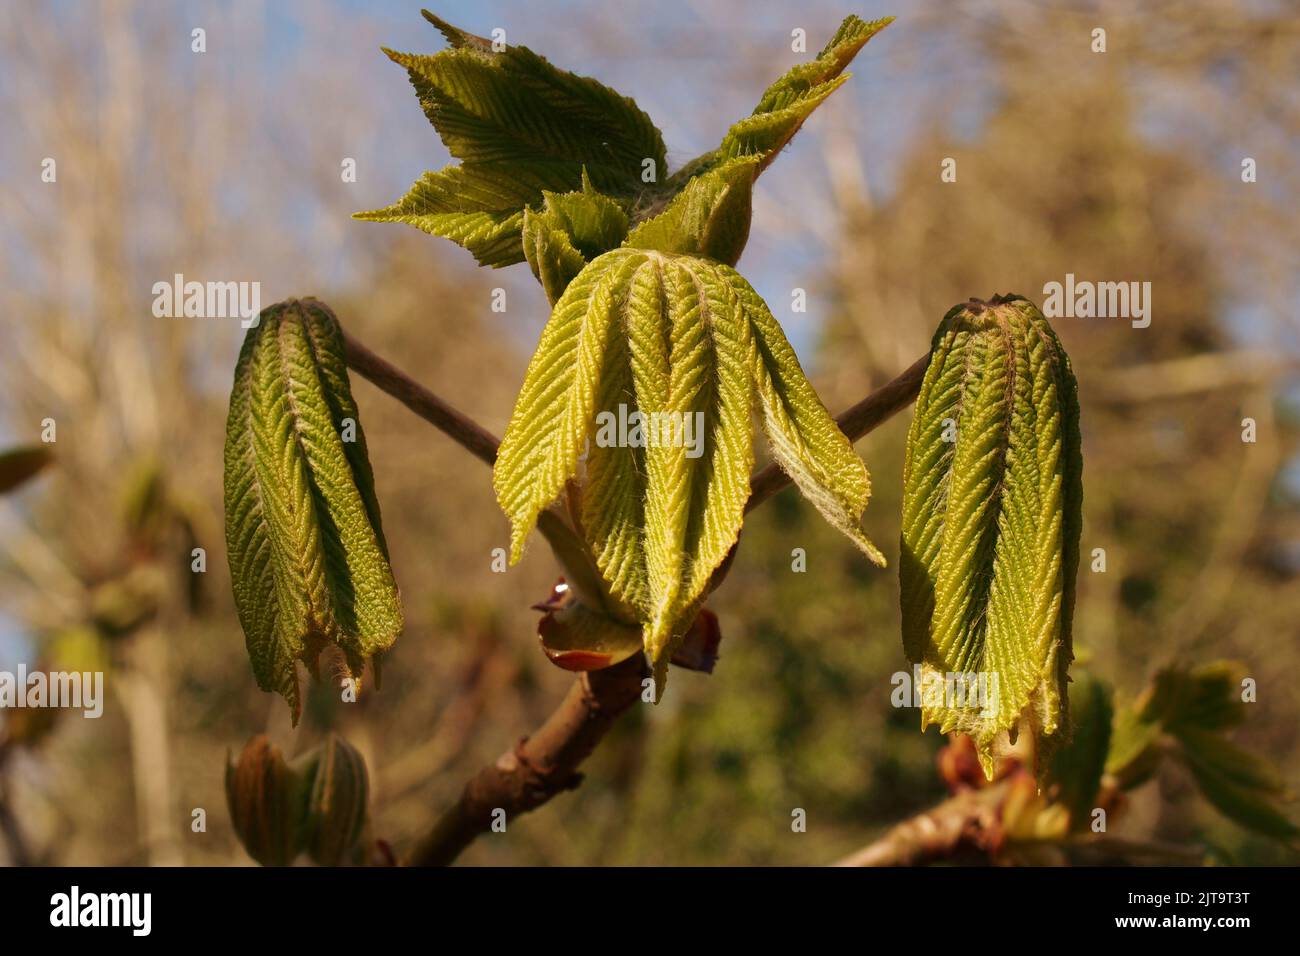 A close up of new fresh growth on a horse chestnut tree, Aesculus hippocastanum, in springtime sunshine Stock Photo